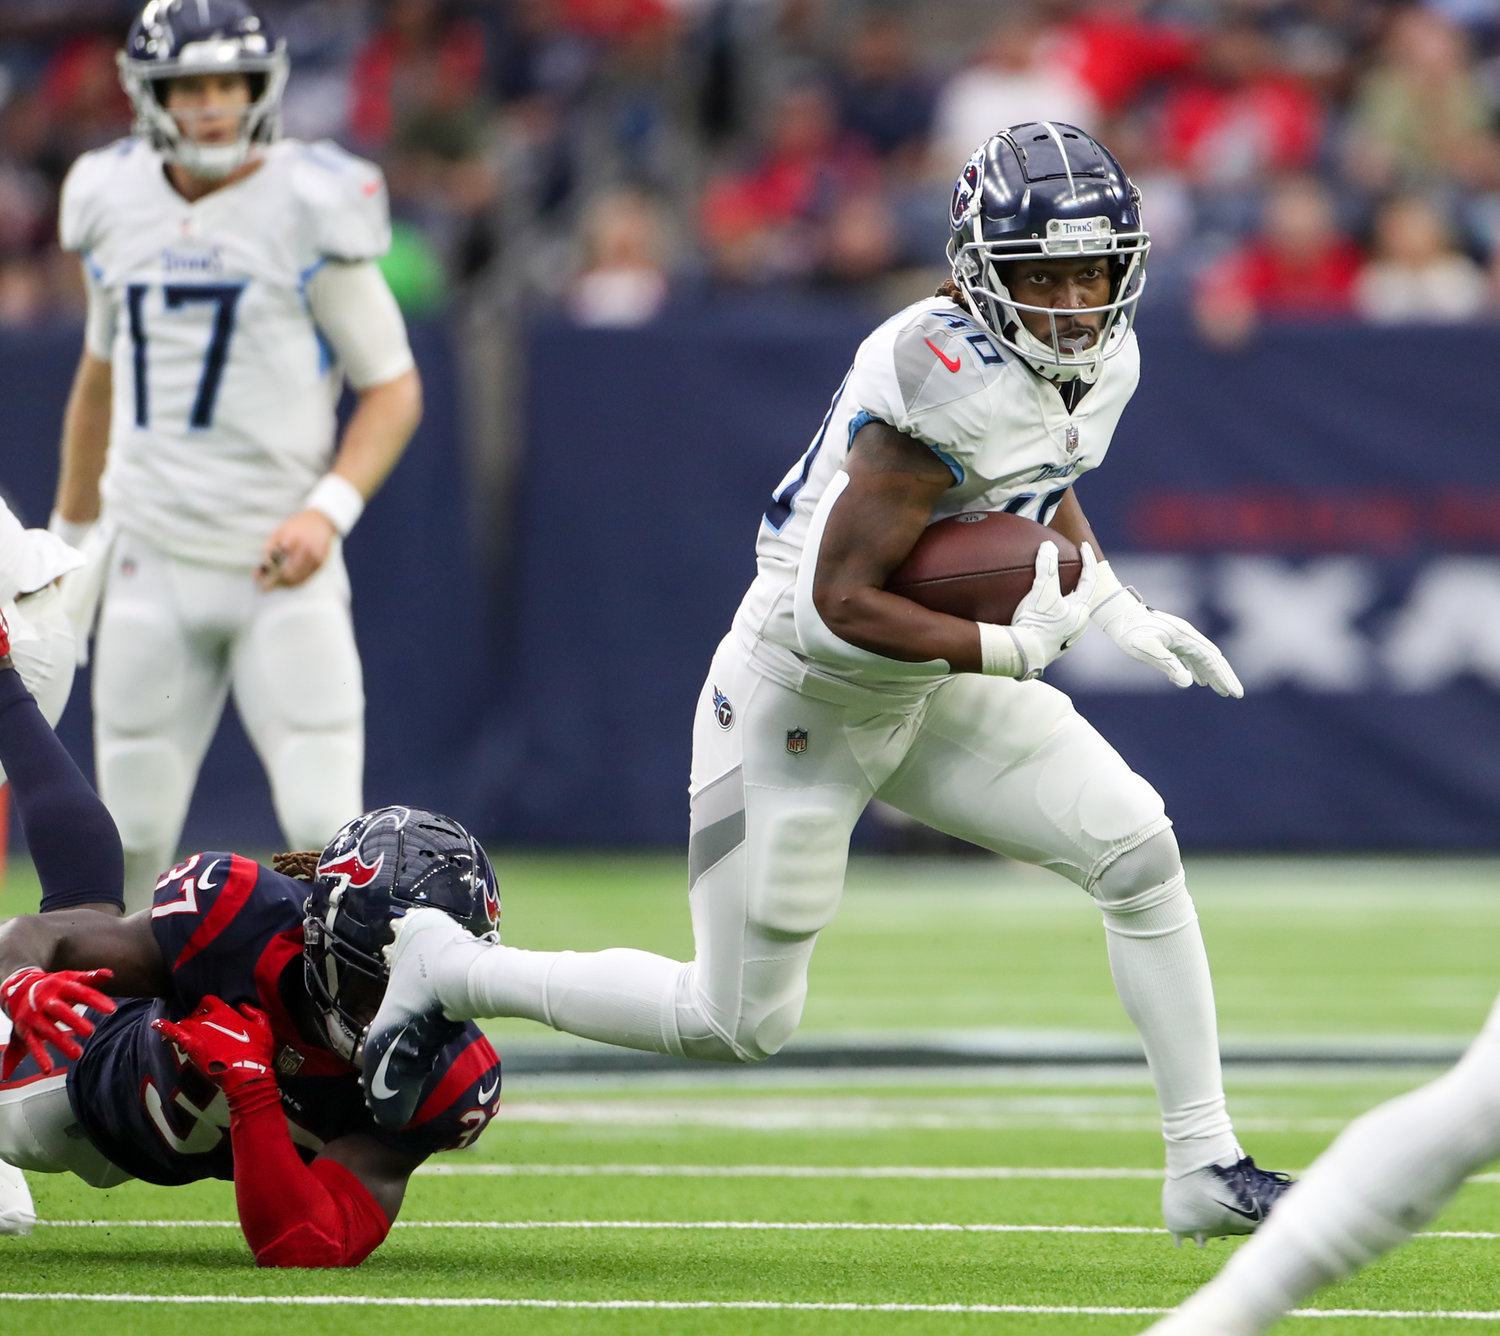 Tennessee Titans running back Dontrell Hilliard (40) carries the ball during an NFL game between the Texans and the Titans on Jan. 9, 2022 in Houston, Texas.